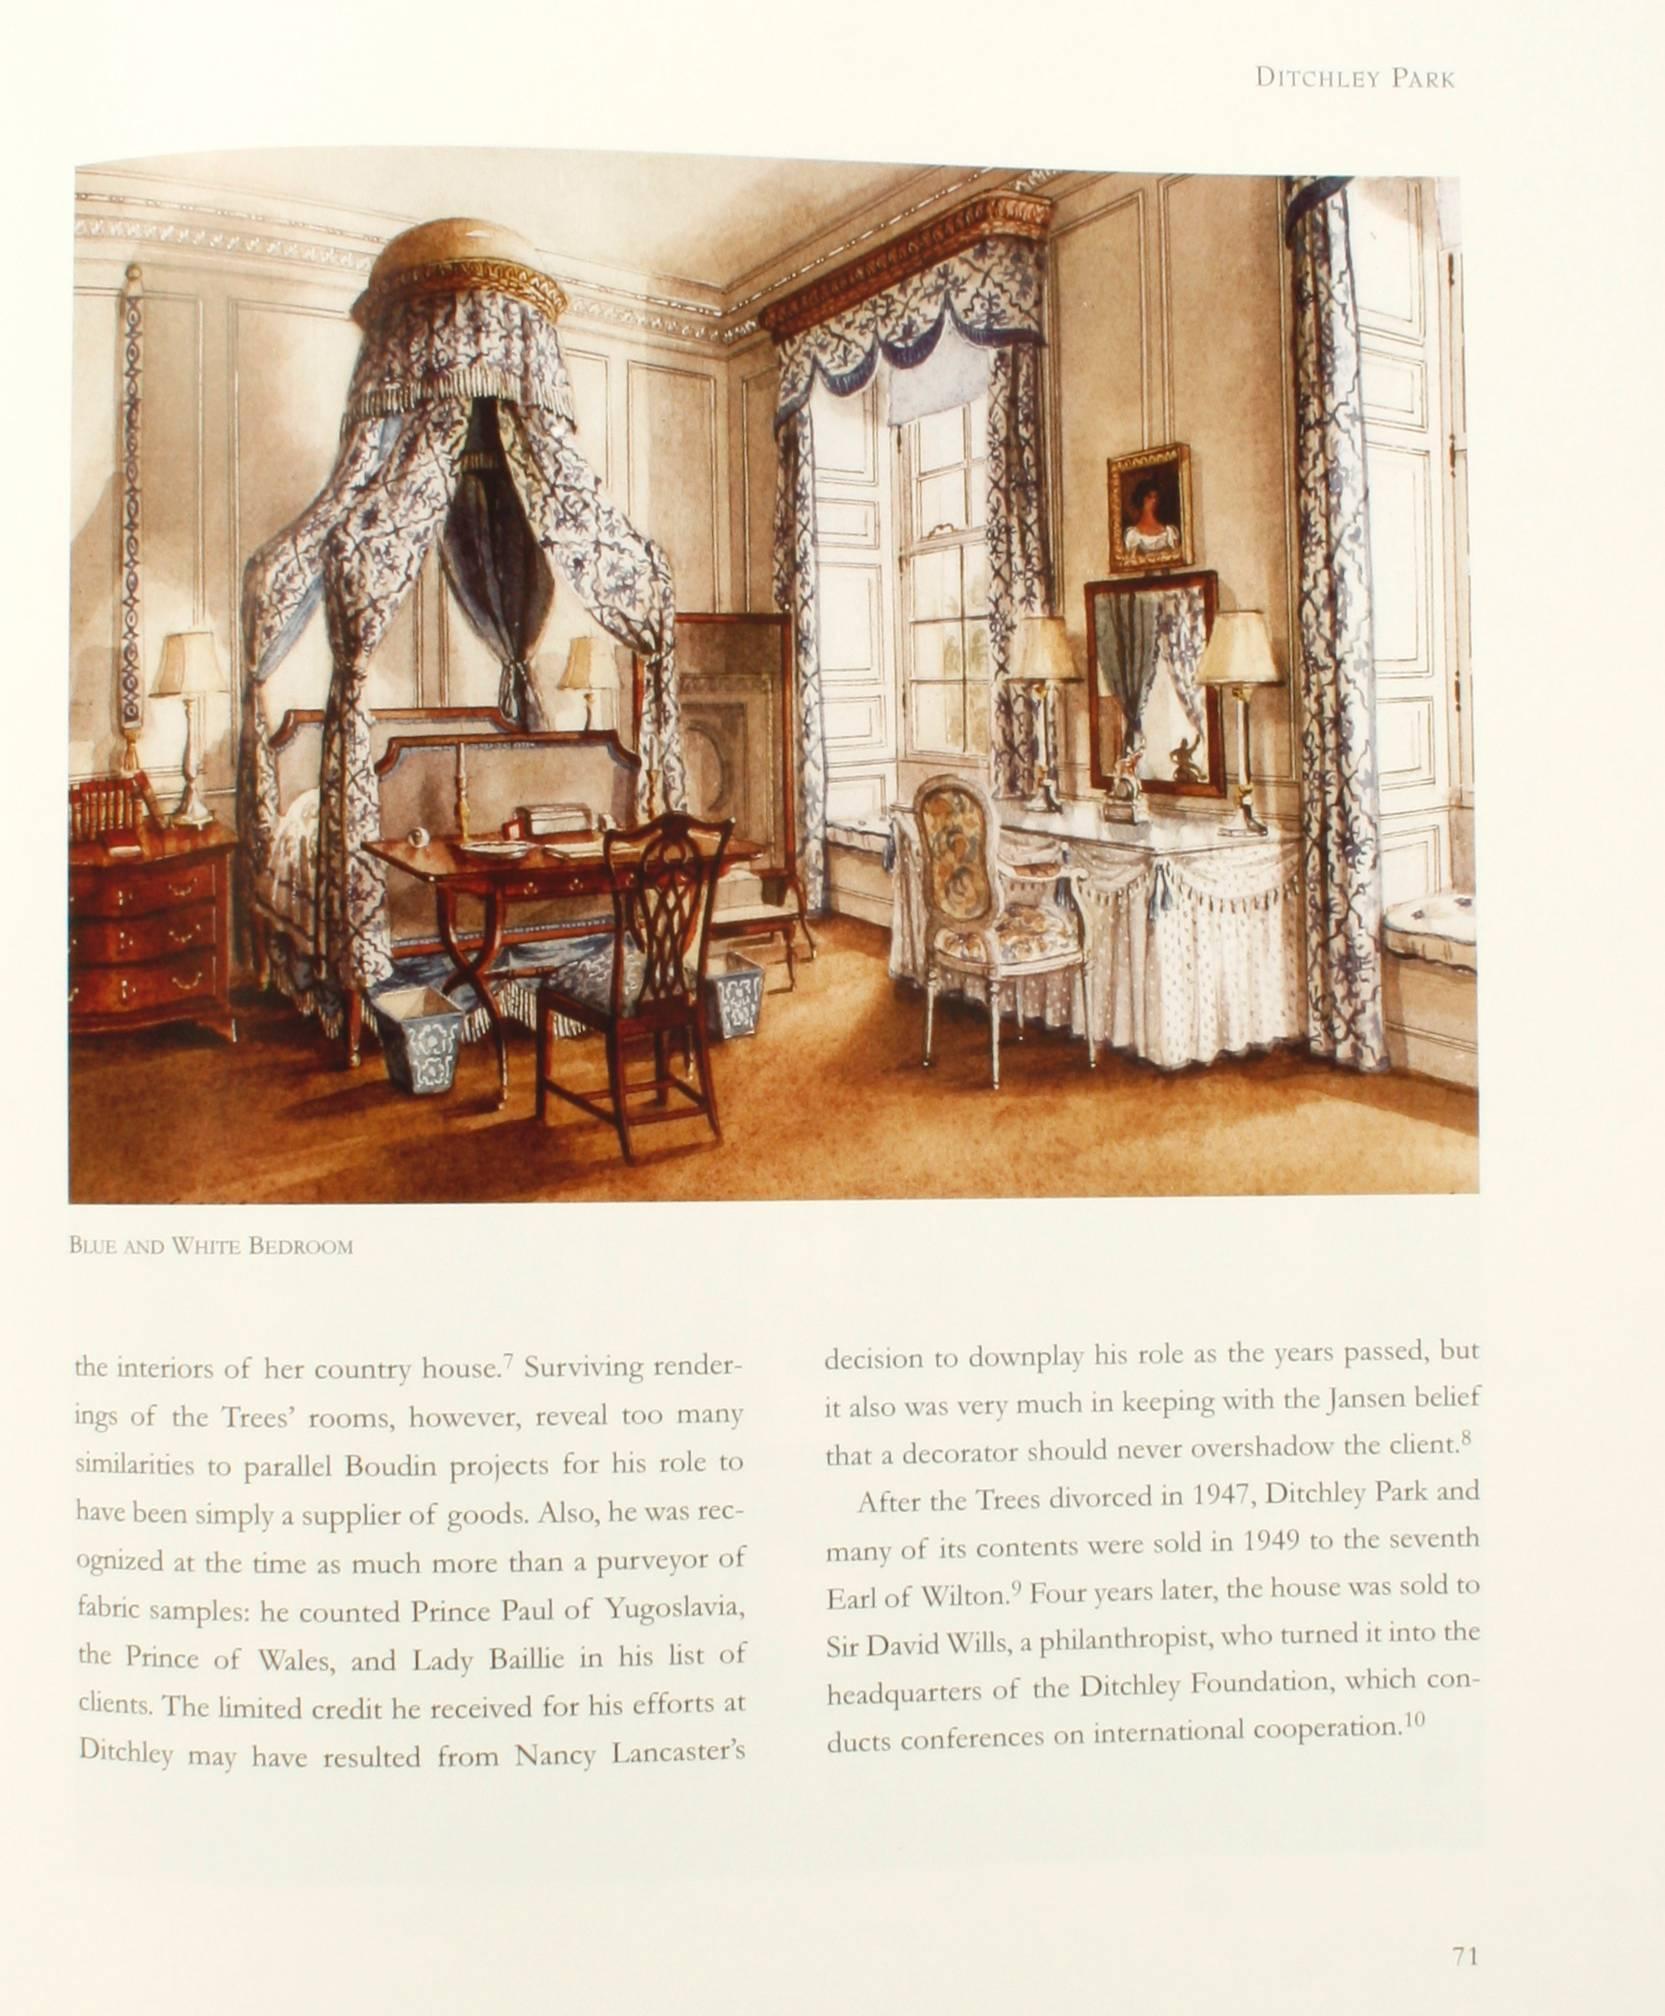 Jansen by James Archer Abbott. New York: Acanthus Press. First edition hardcover with dust jacket, 2006. 323 pp. A detailed history of the celebrated decorating house with project profiles of some of the 20th century's most prominent interior design